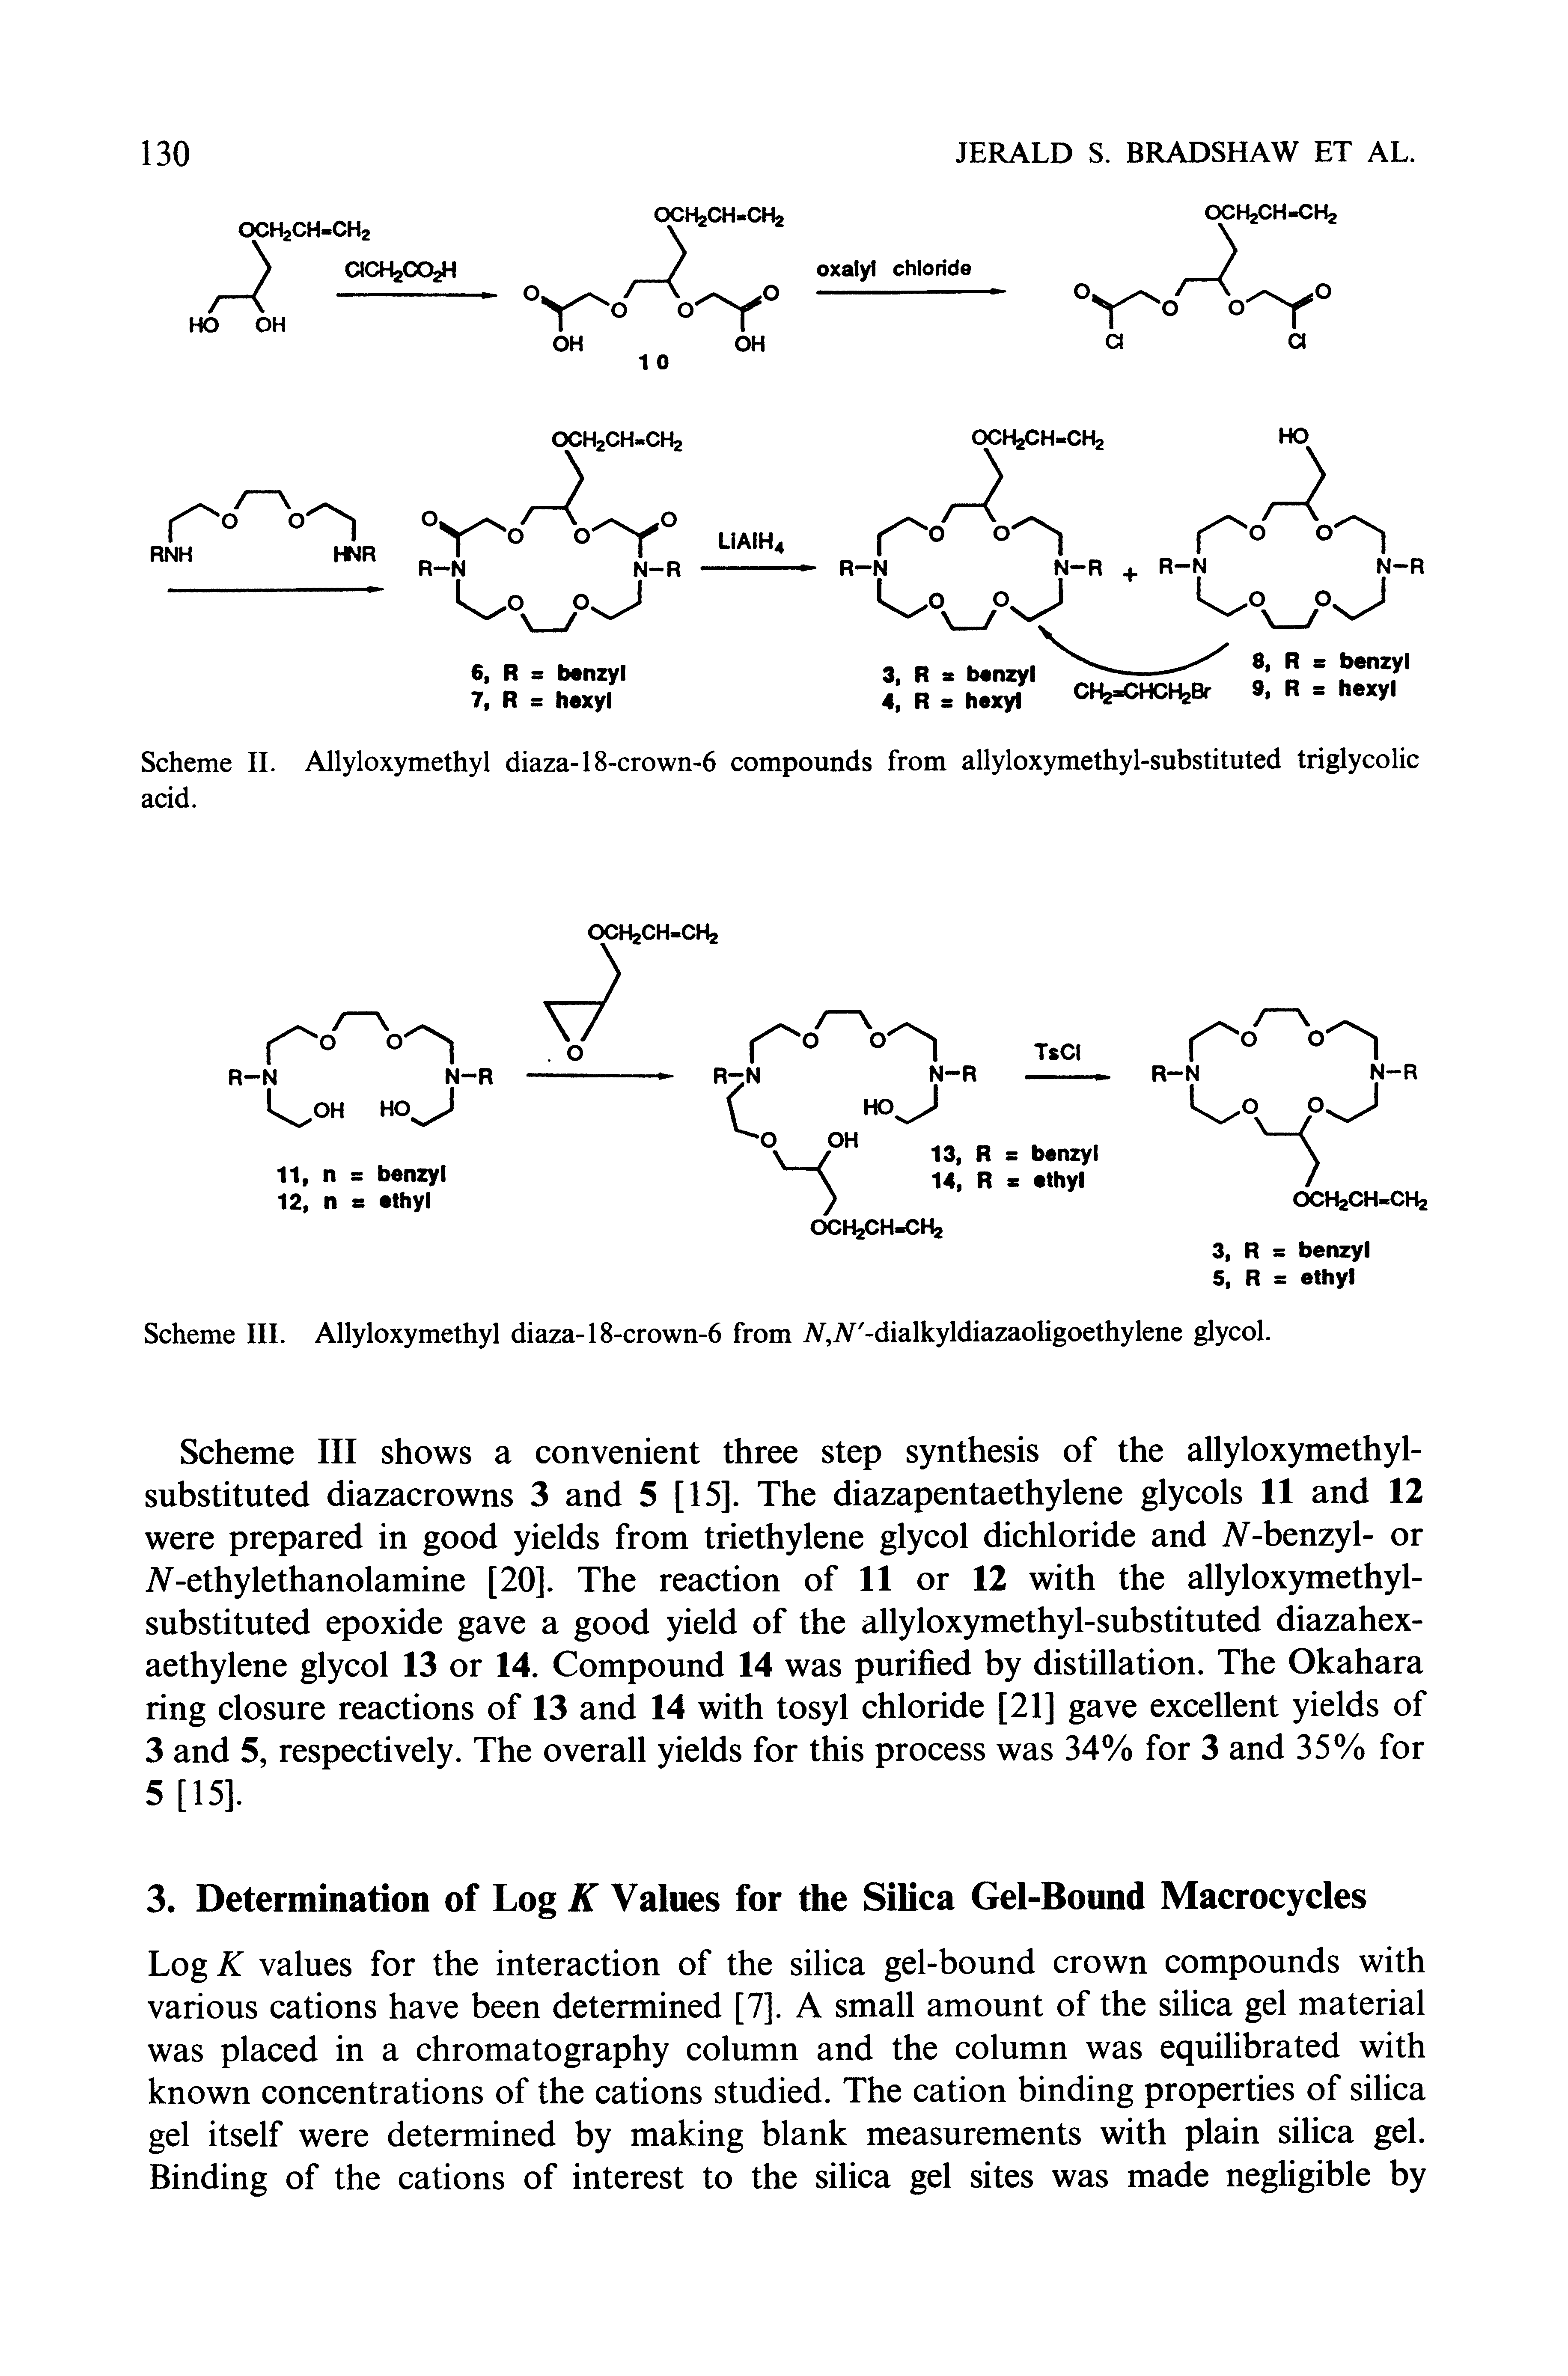 Scheme III shows a convenient three step synthesis of the allyloxymethyl-substituted diazacrowns 3 and 5 [15]. The diazapentaethylene glycols 11 and 12 were prepared in good yields from triethylene glycol dichloride and iV-benzyl- or AT-ethylethanolamine [20]. The reaction of 11 or 12 with the allyloxymethyl-substituted epoxide gave a good yield of the allyloxymethyl-substituted diazahex-aethylene glycol 13 or 14. Compound 14 was purified by distillation. The Okahara ring closure reactions of 13 and 14 with tosyl chloride [21] gave excellent yields of 3 and 5, respectively. The overall yields for this process was 34% for 3 and 35% for 5 [15].